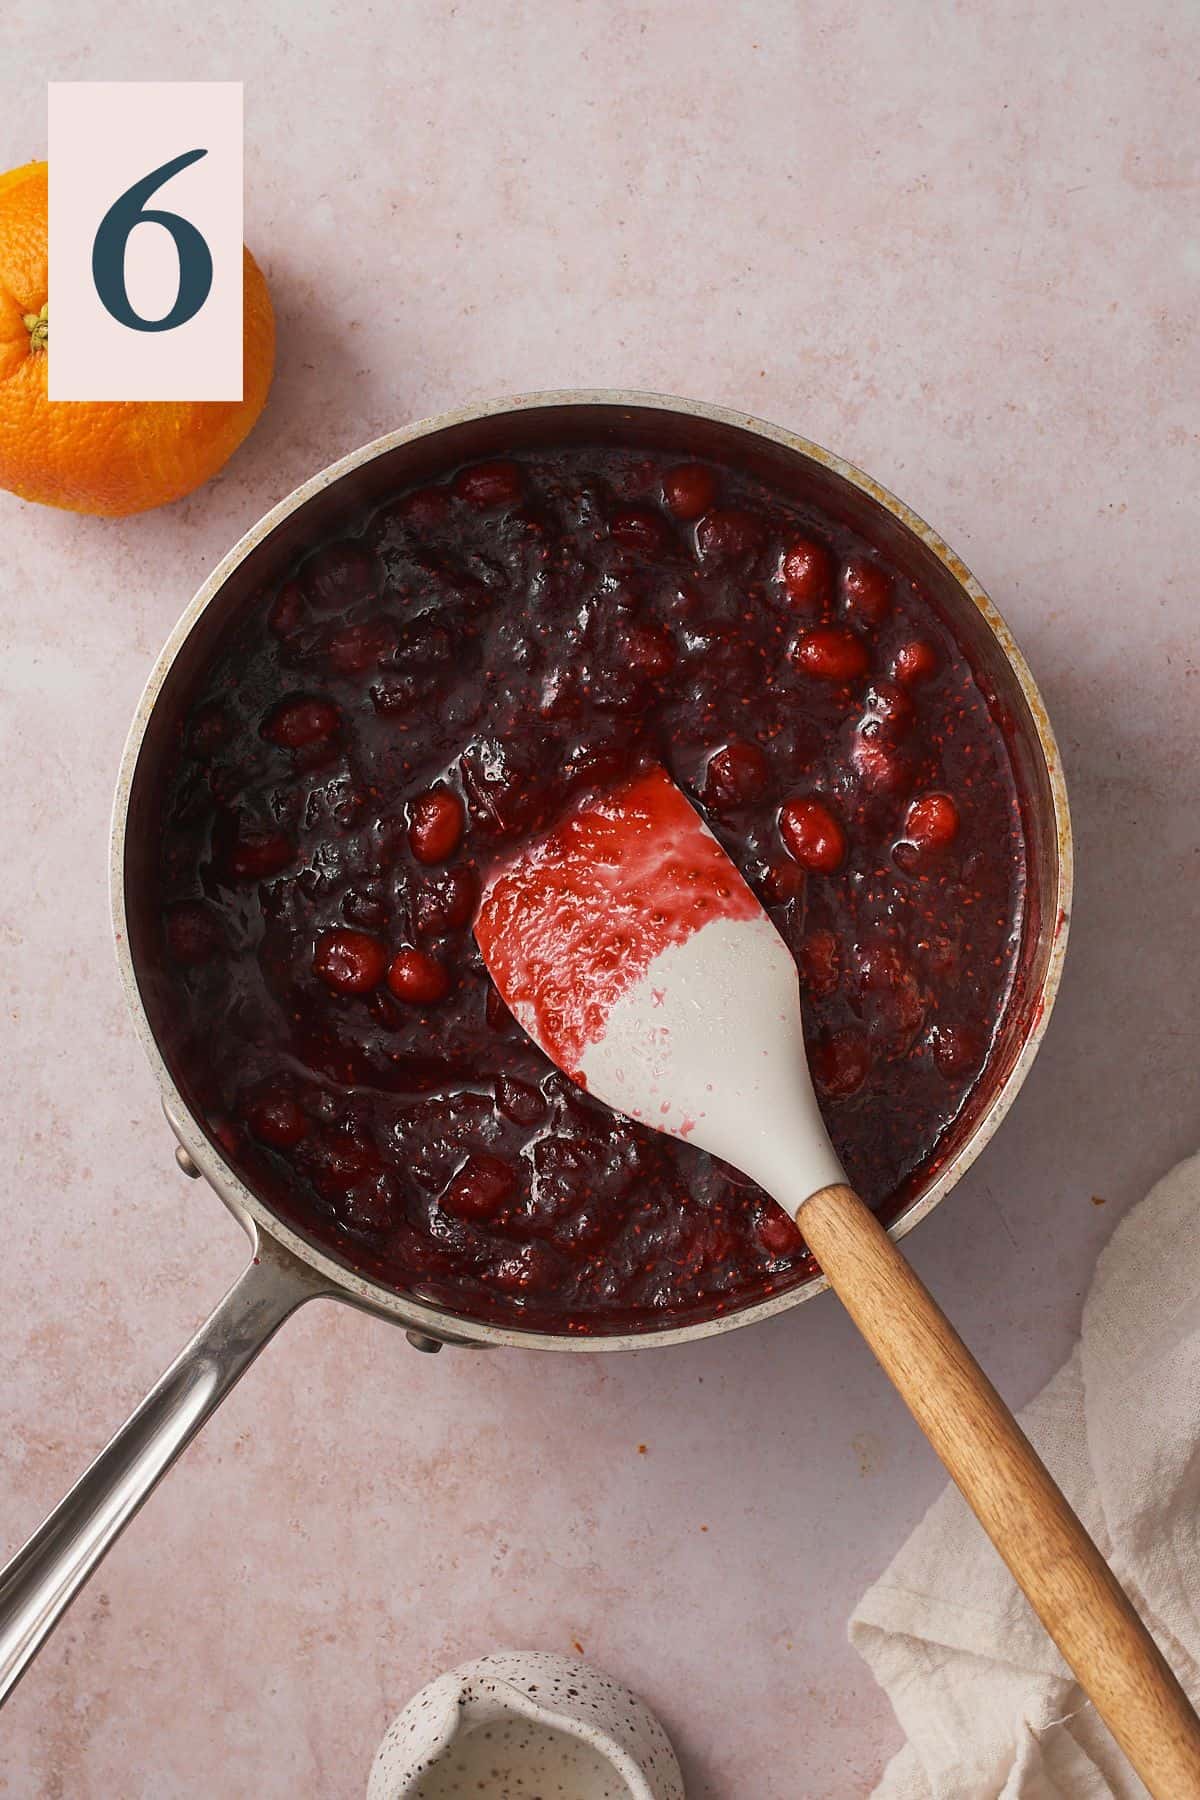 cranberry sauce thickening in a saucepan with a rubber spatula, and an orange nearby.